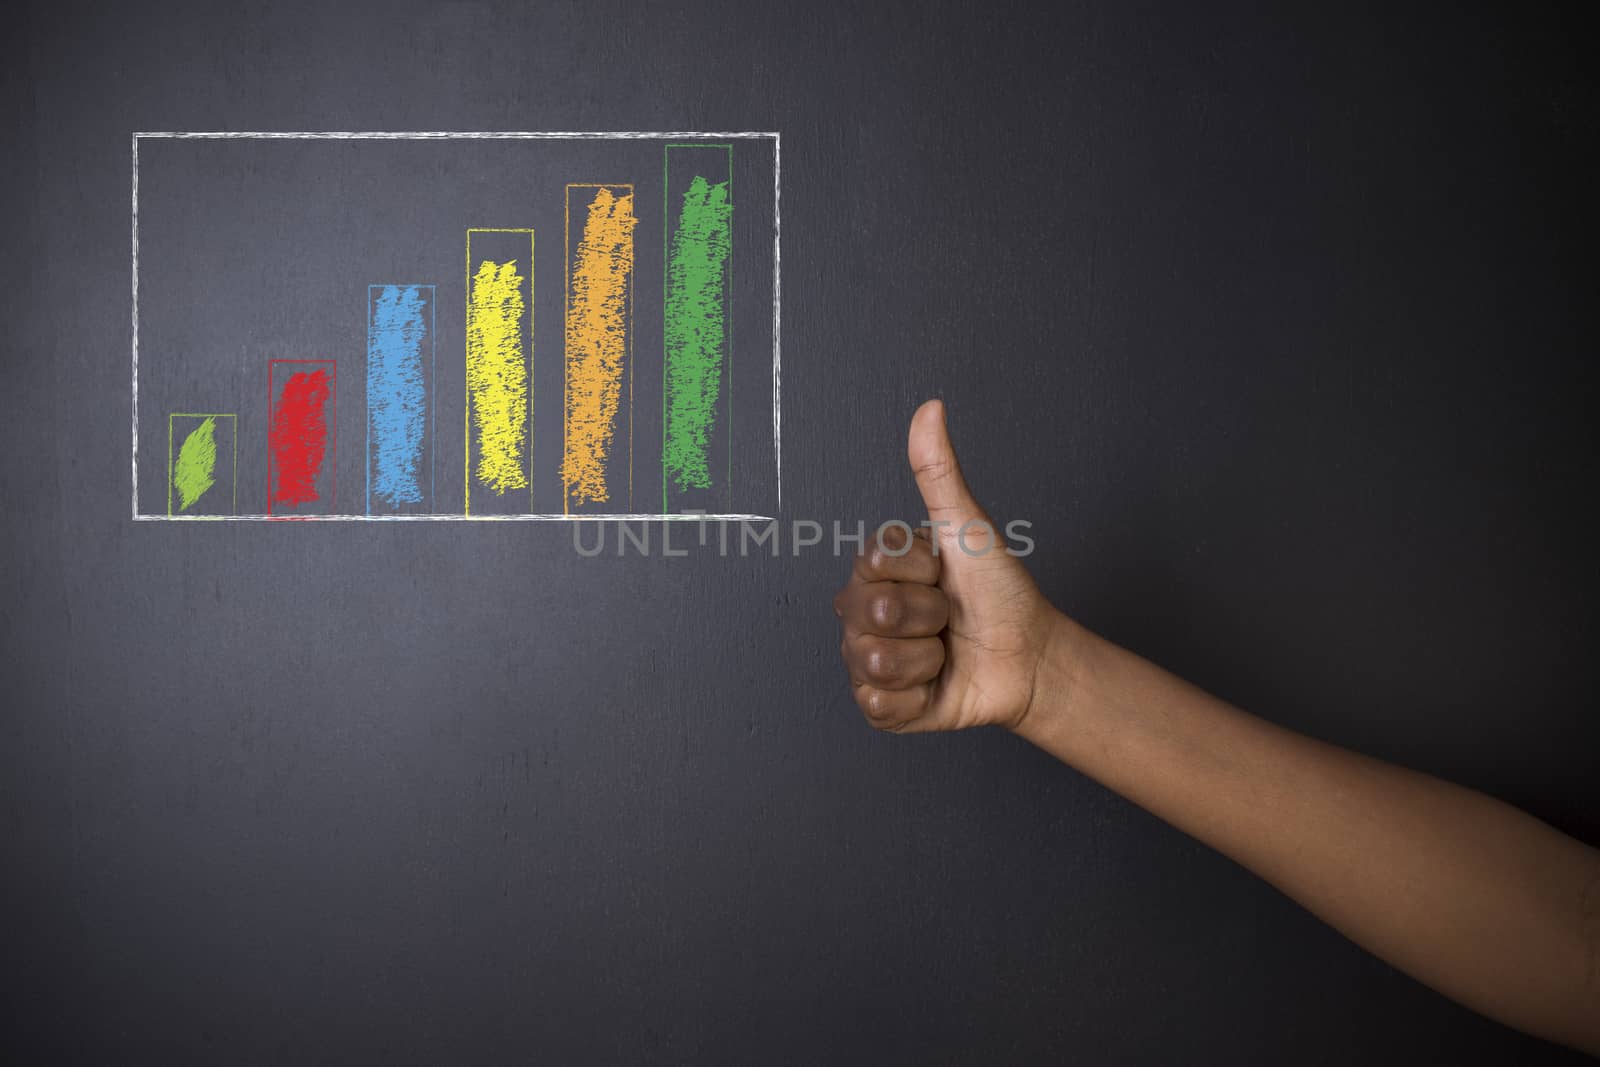 South African or African American woman teacher or student thumbs up against blackboard chalk bar graph by alistaircotton